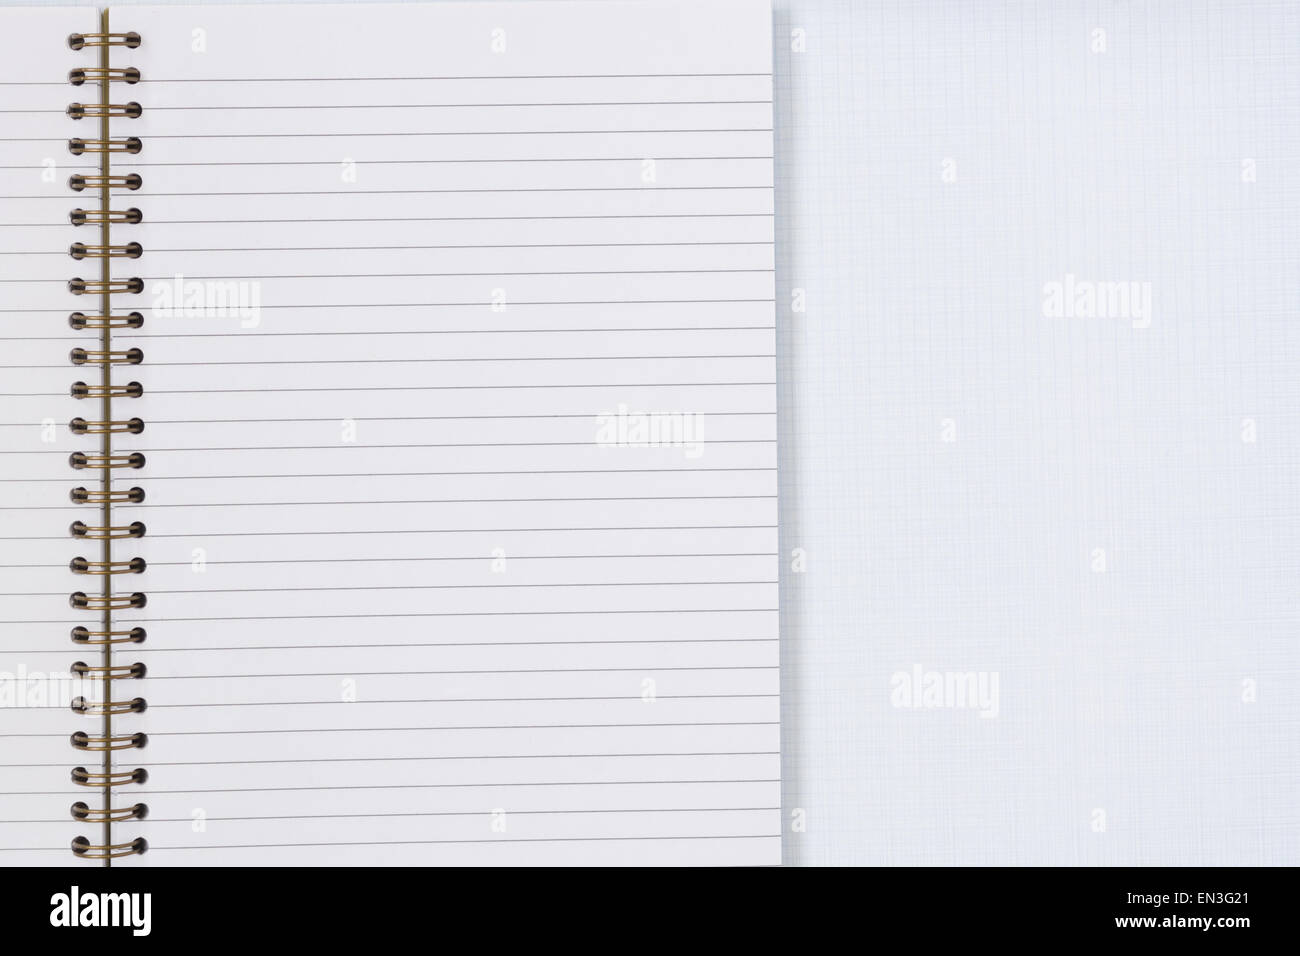 Lined paper with pen Stock Photo